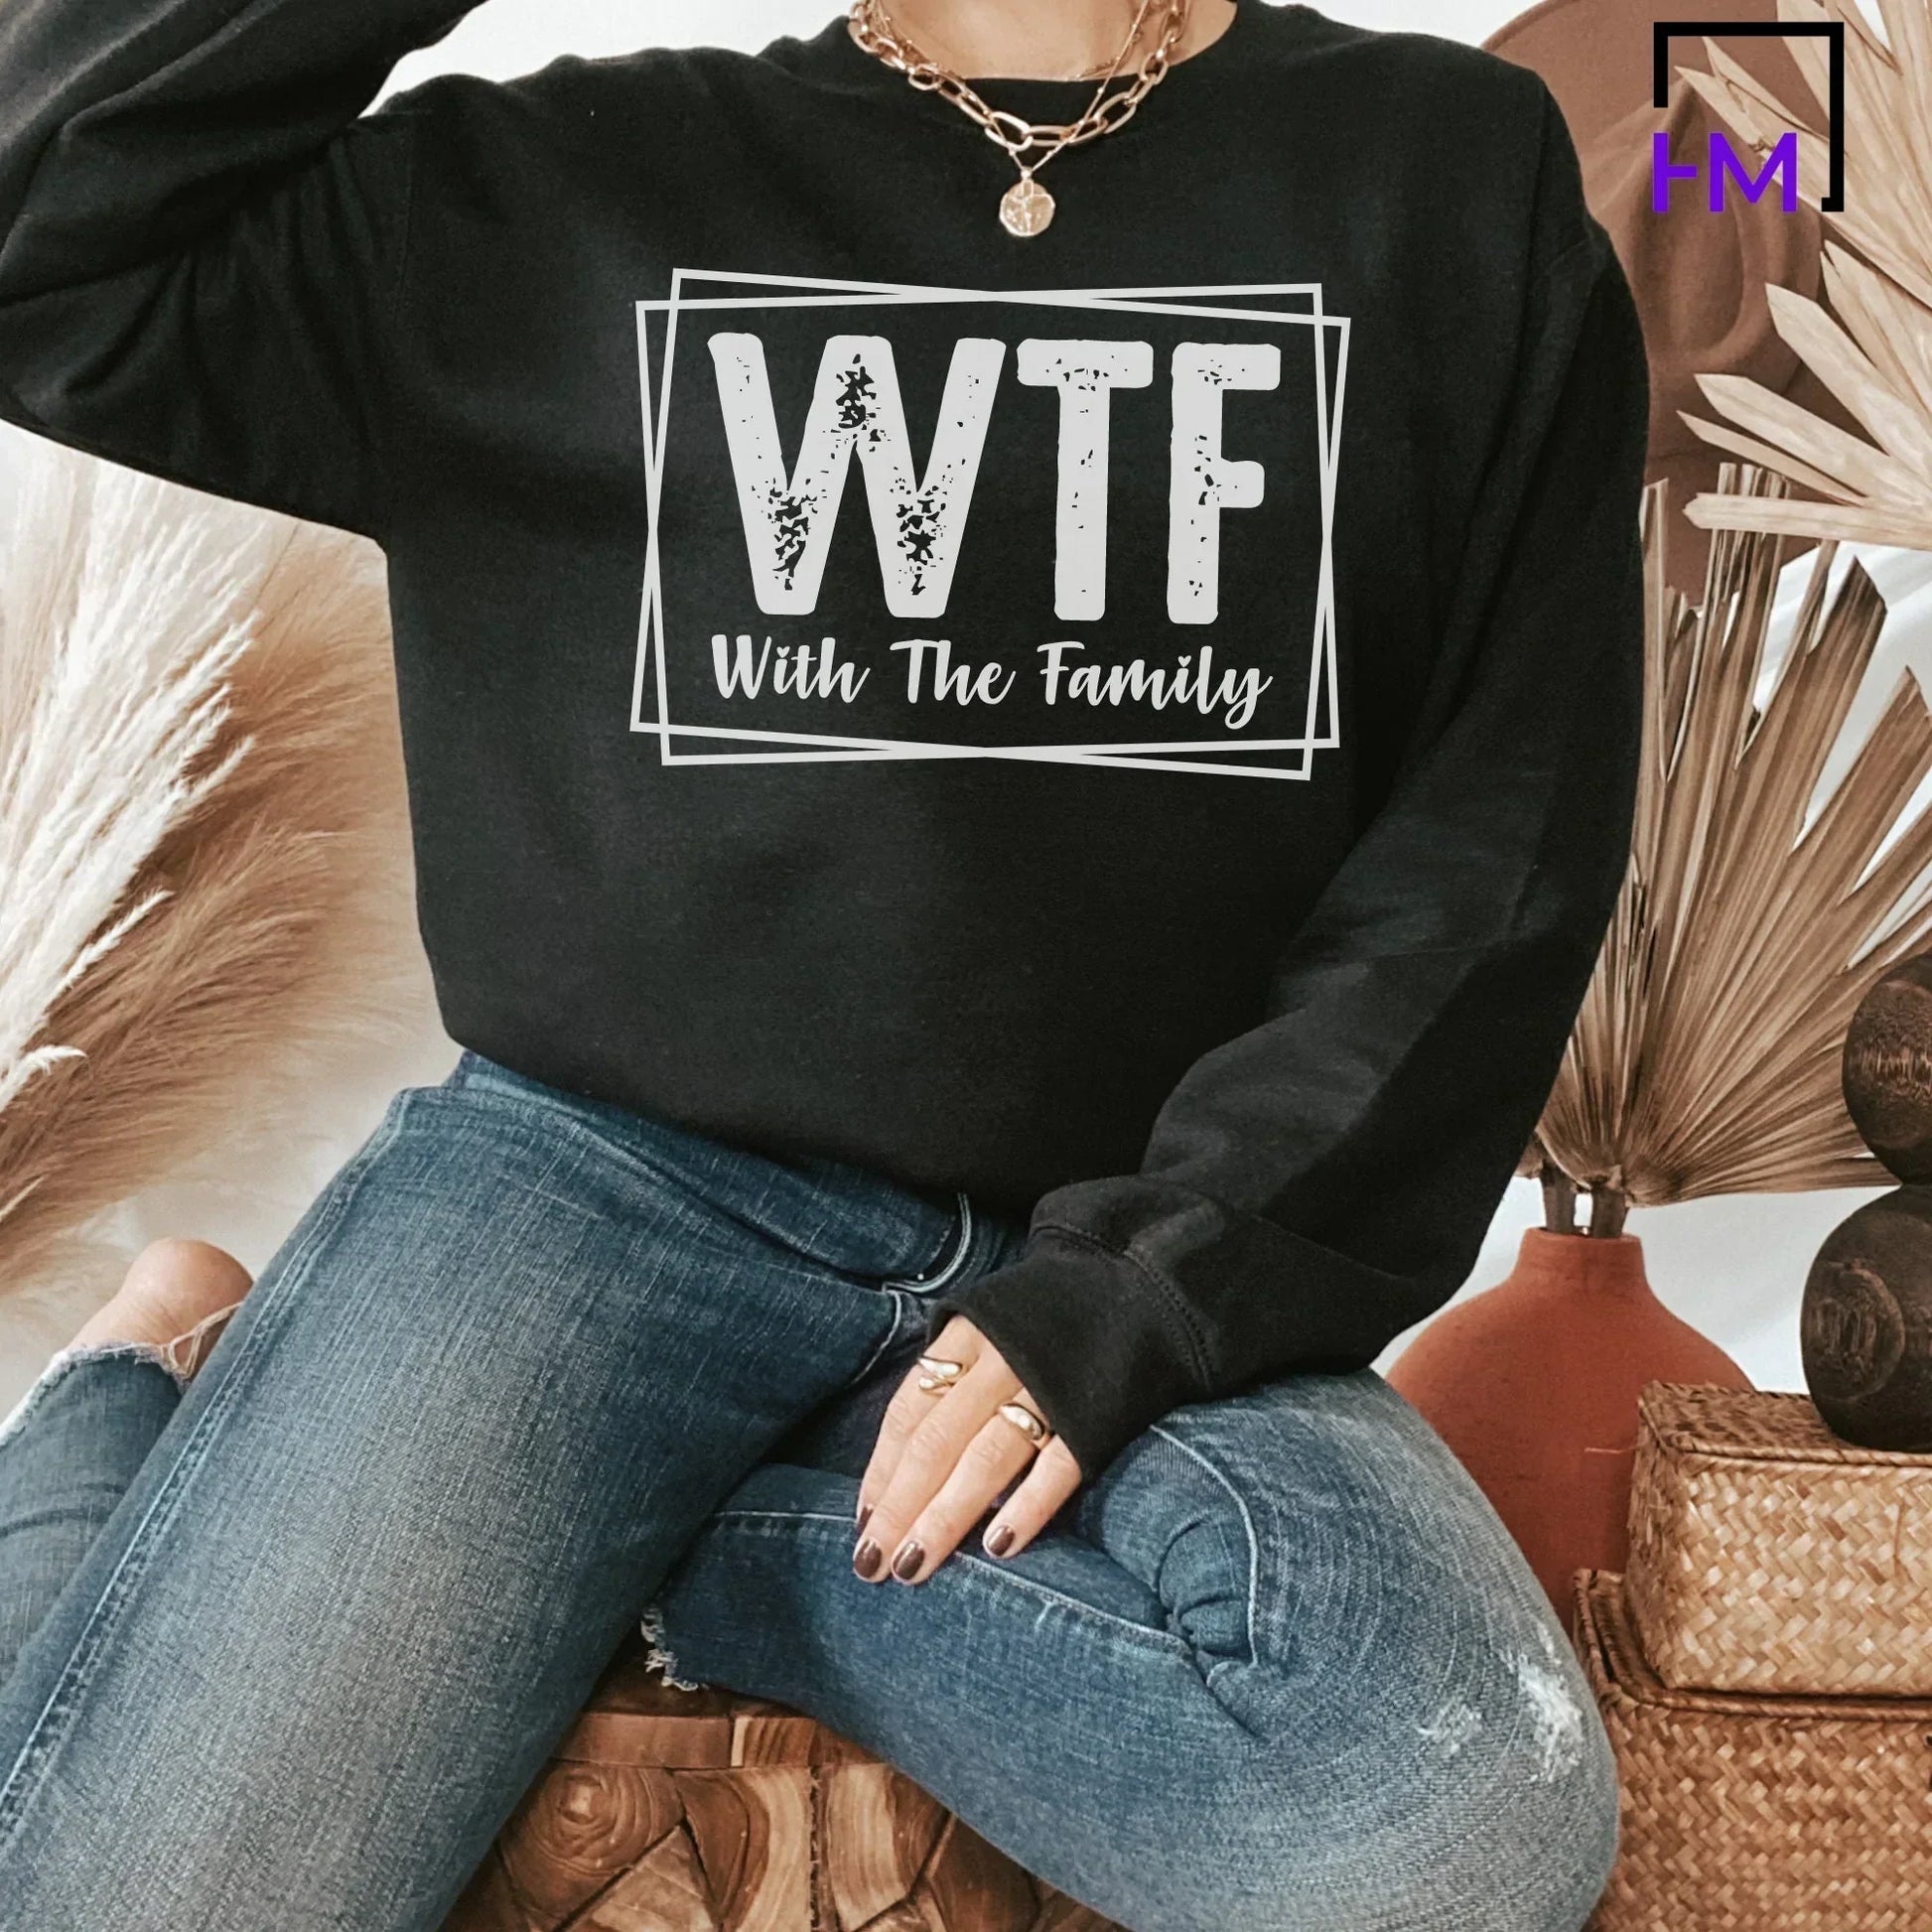 Family Vacation Shirt, WTF With the Family Shirts, Funny Family T-shirts, With the Family Shirts, Family Matching Shirt, Funny Family Shirts